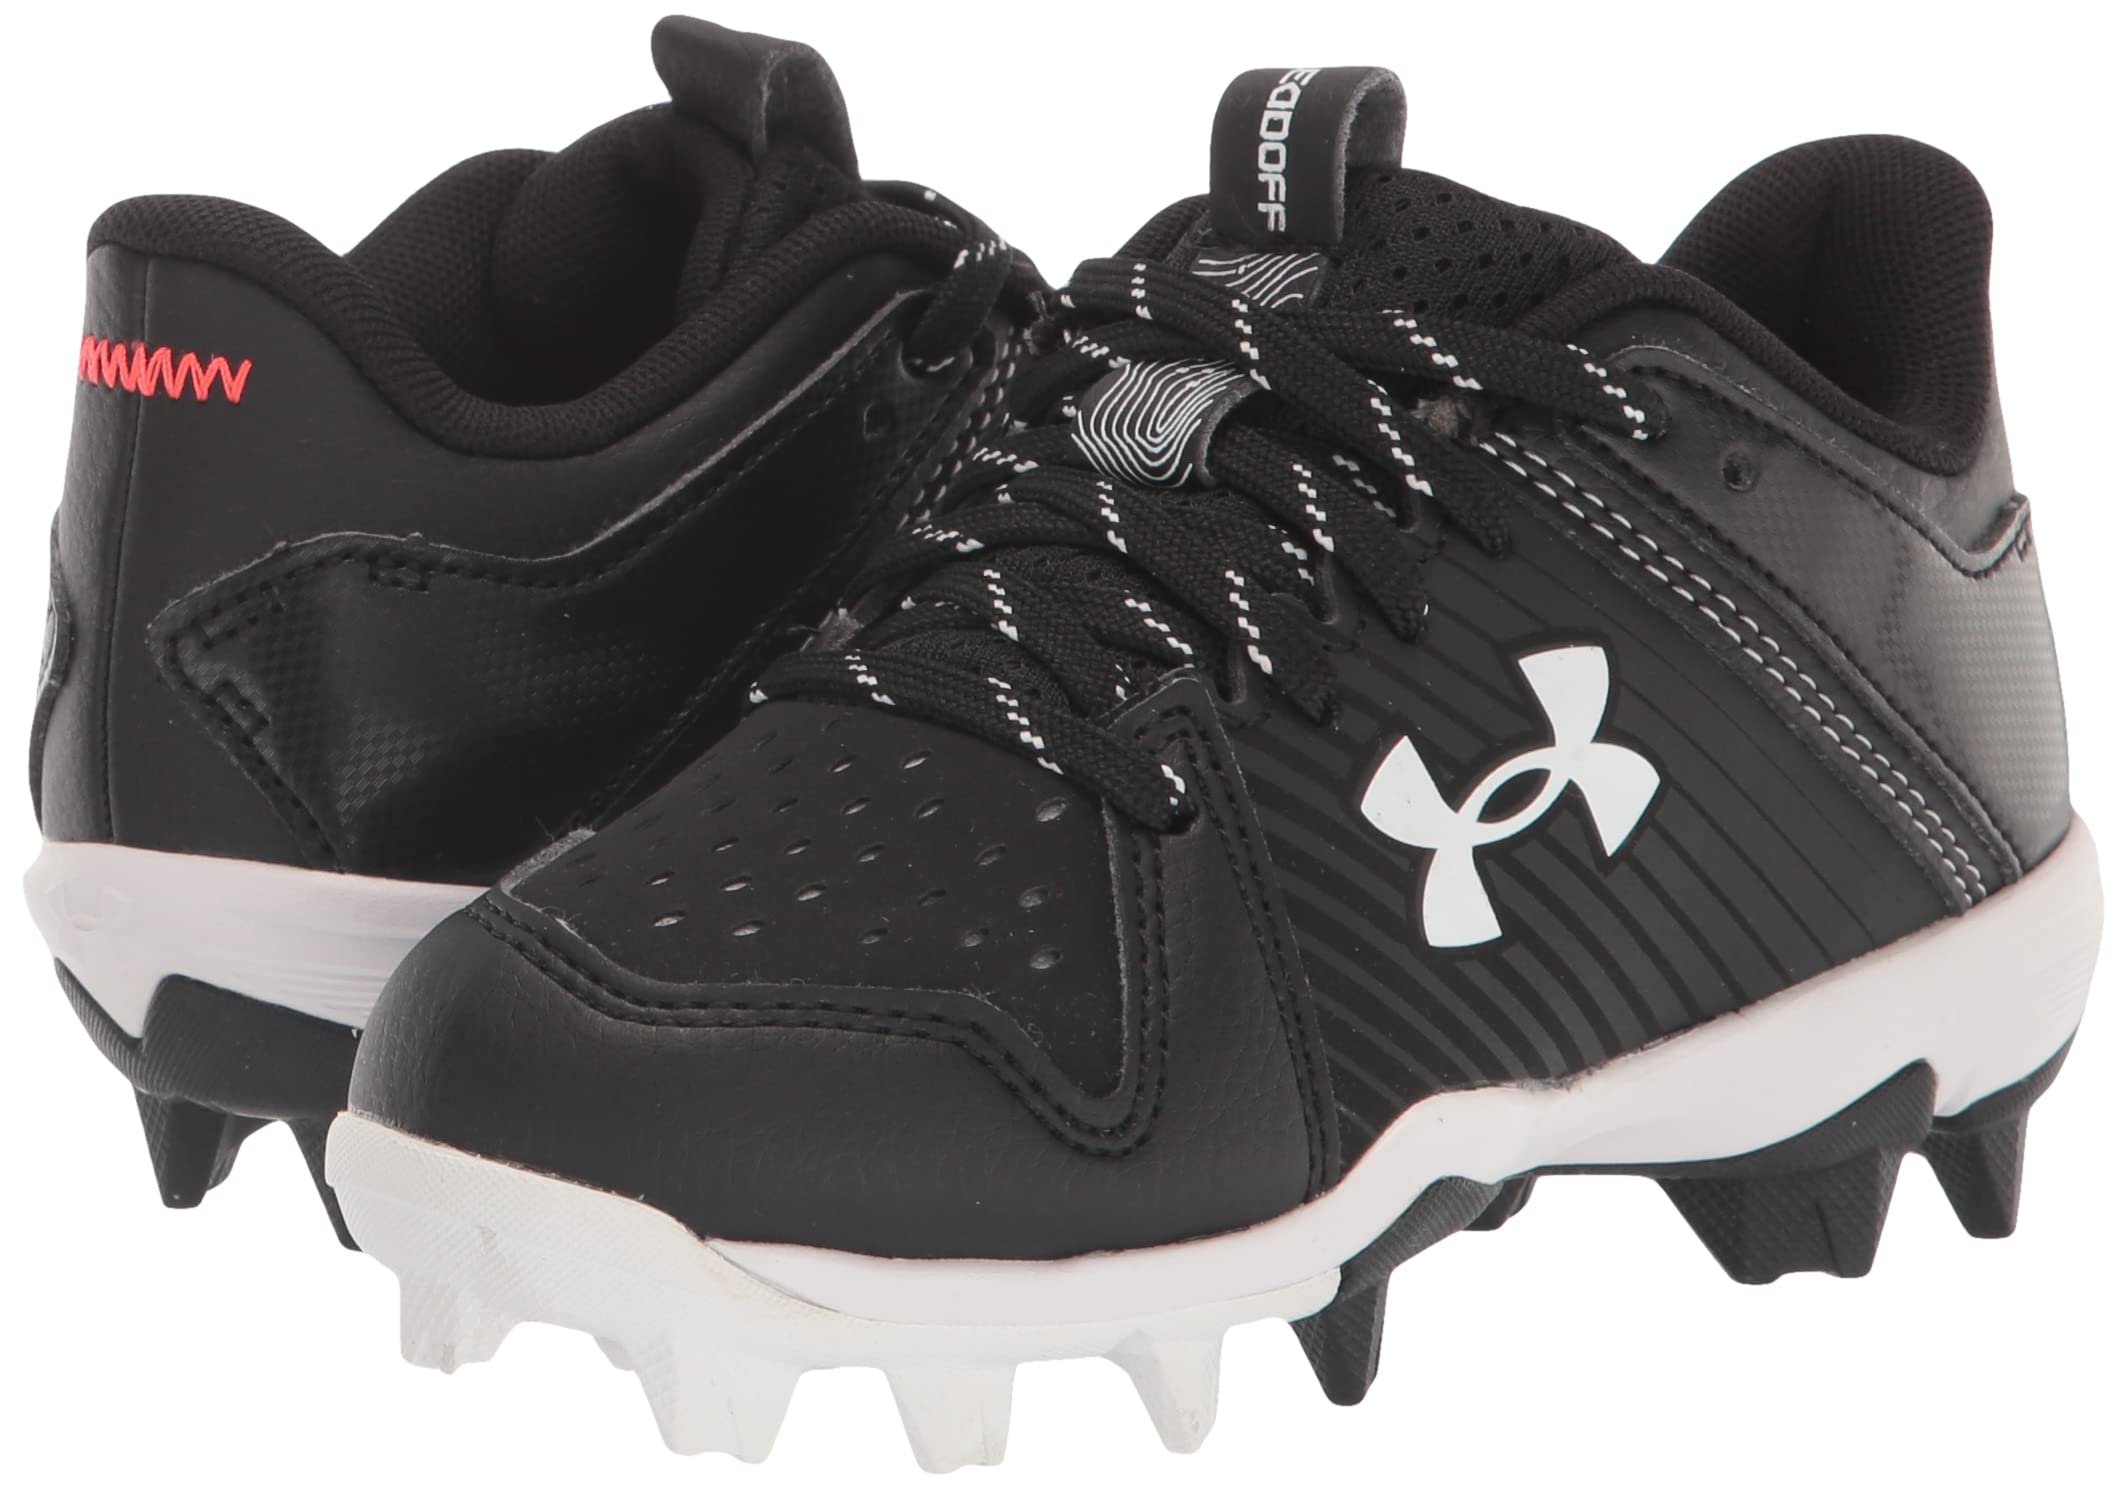 Under Armour baby boys Leadoff Low Junior Rubber Molded Cleat Baseball Shoe, (001) Black/Black/White, 3.5 Big Kid US